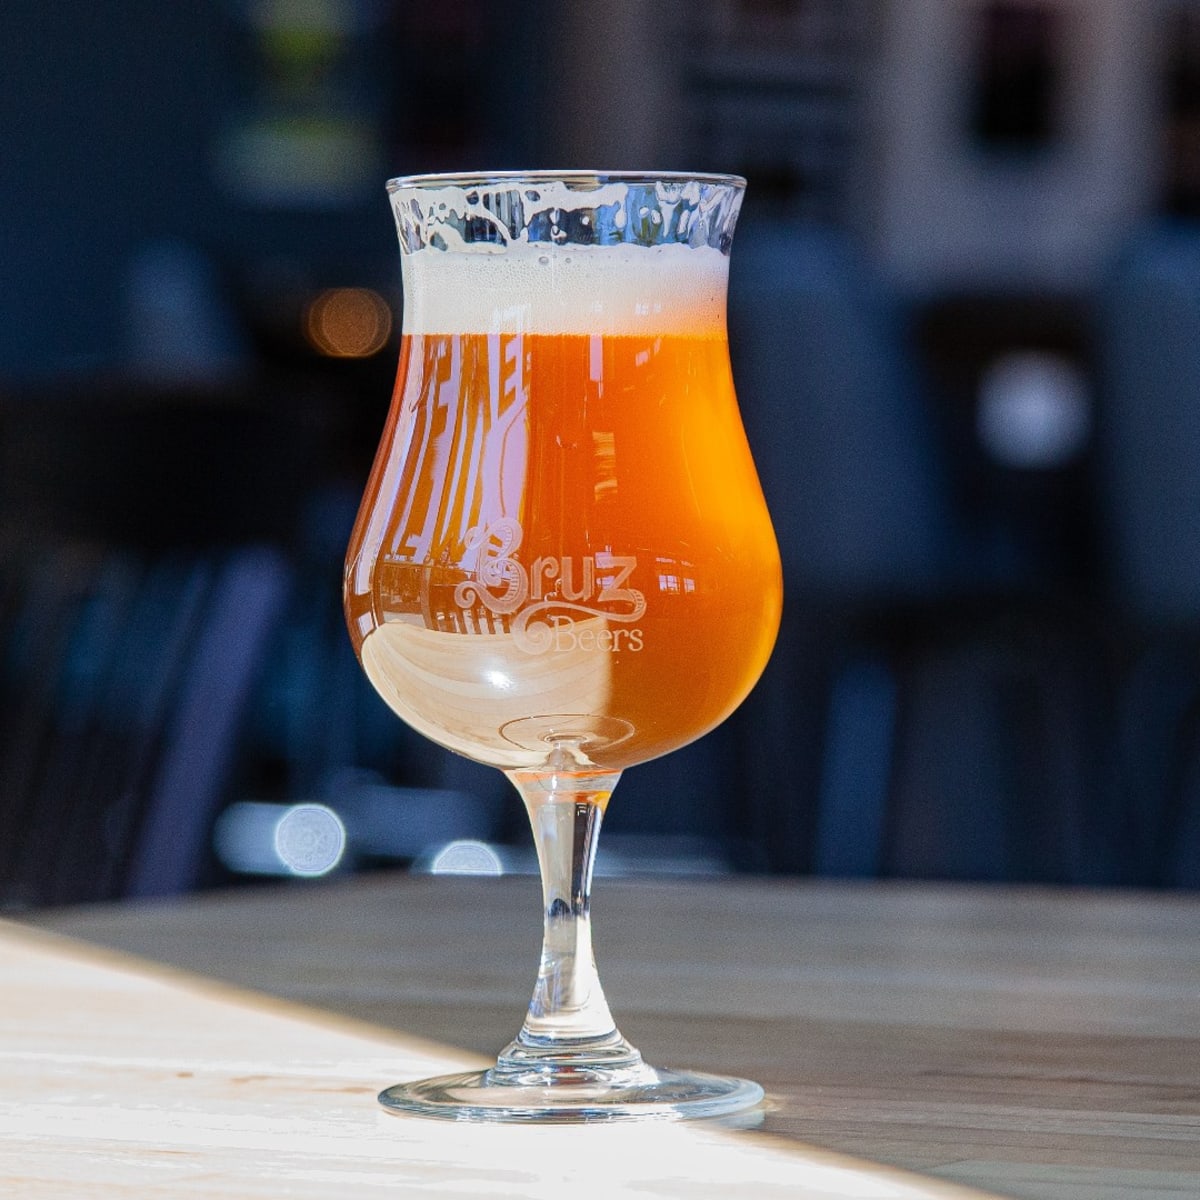 Every Type of Beer Glass, Ranked From Worst to Best - Men's Journal